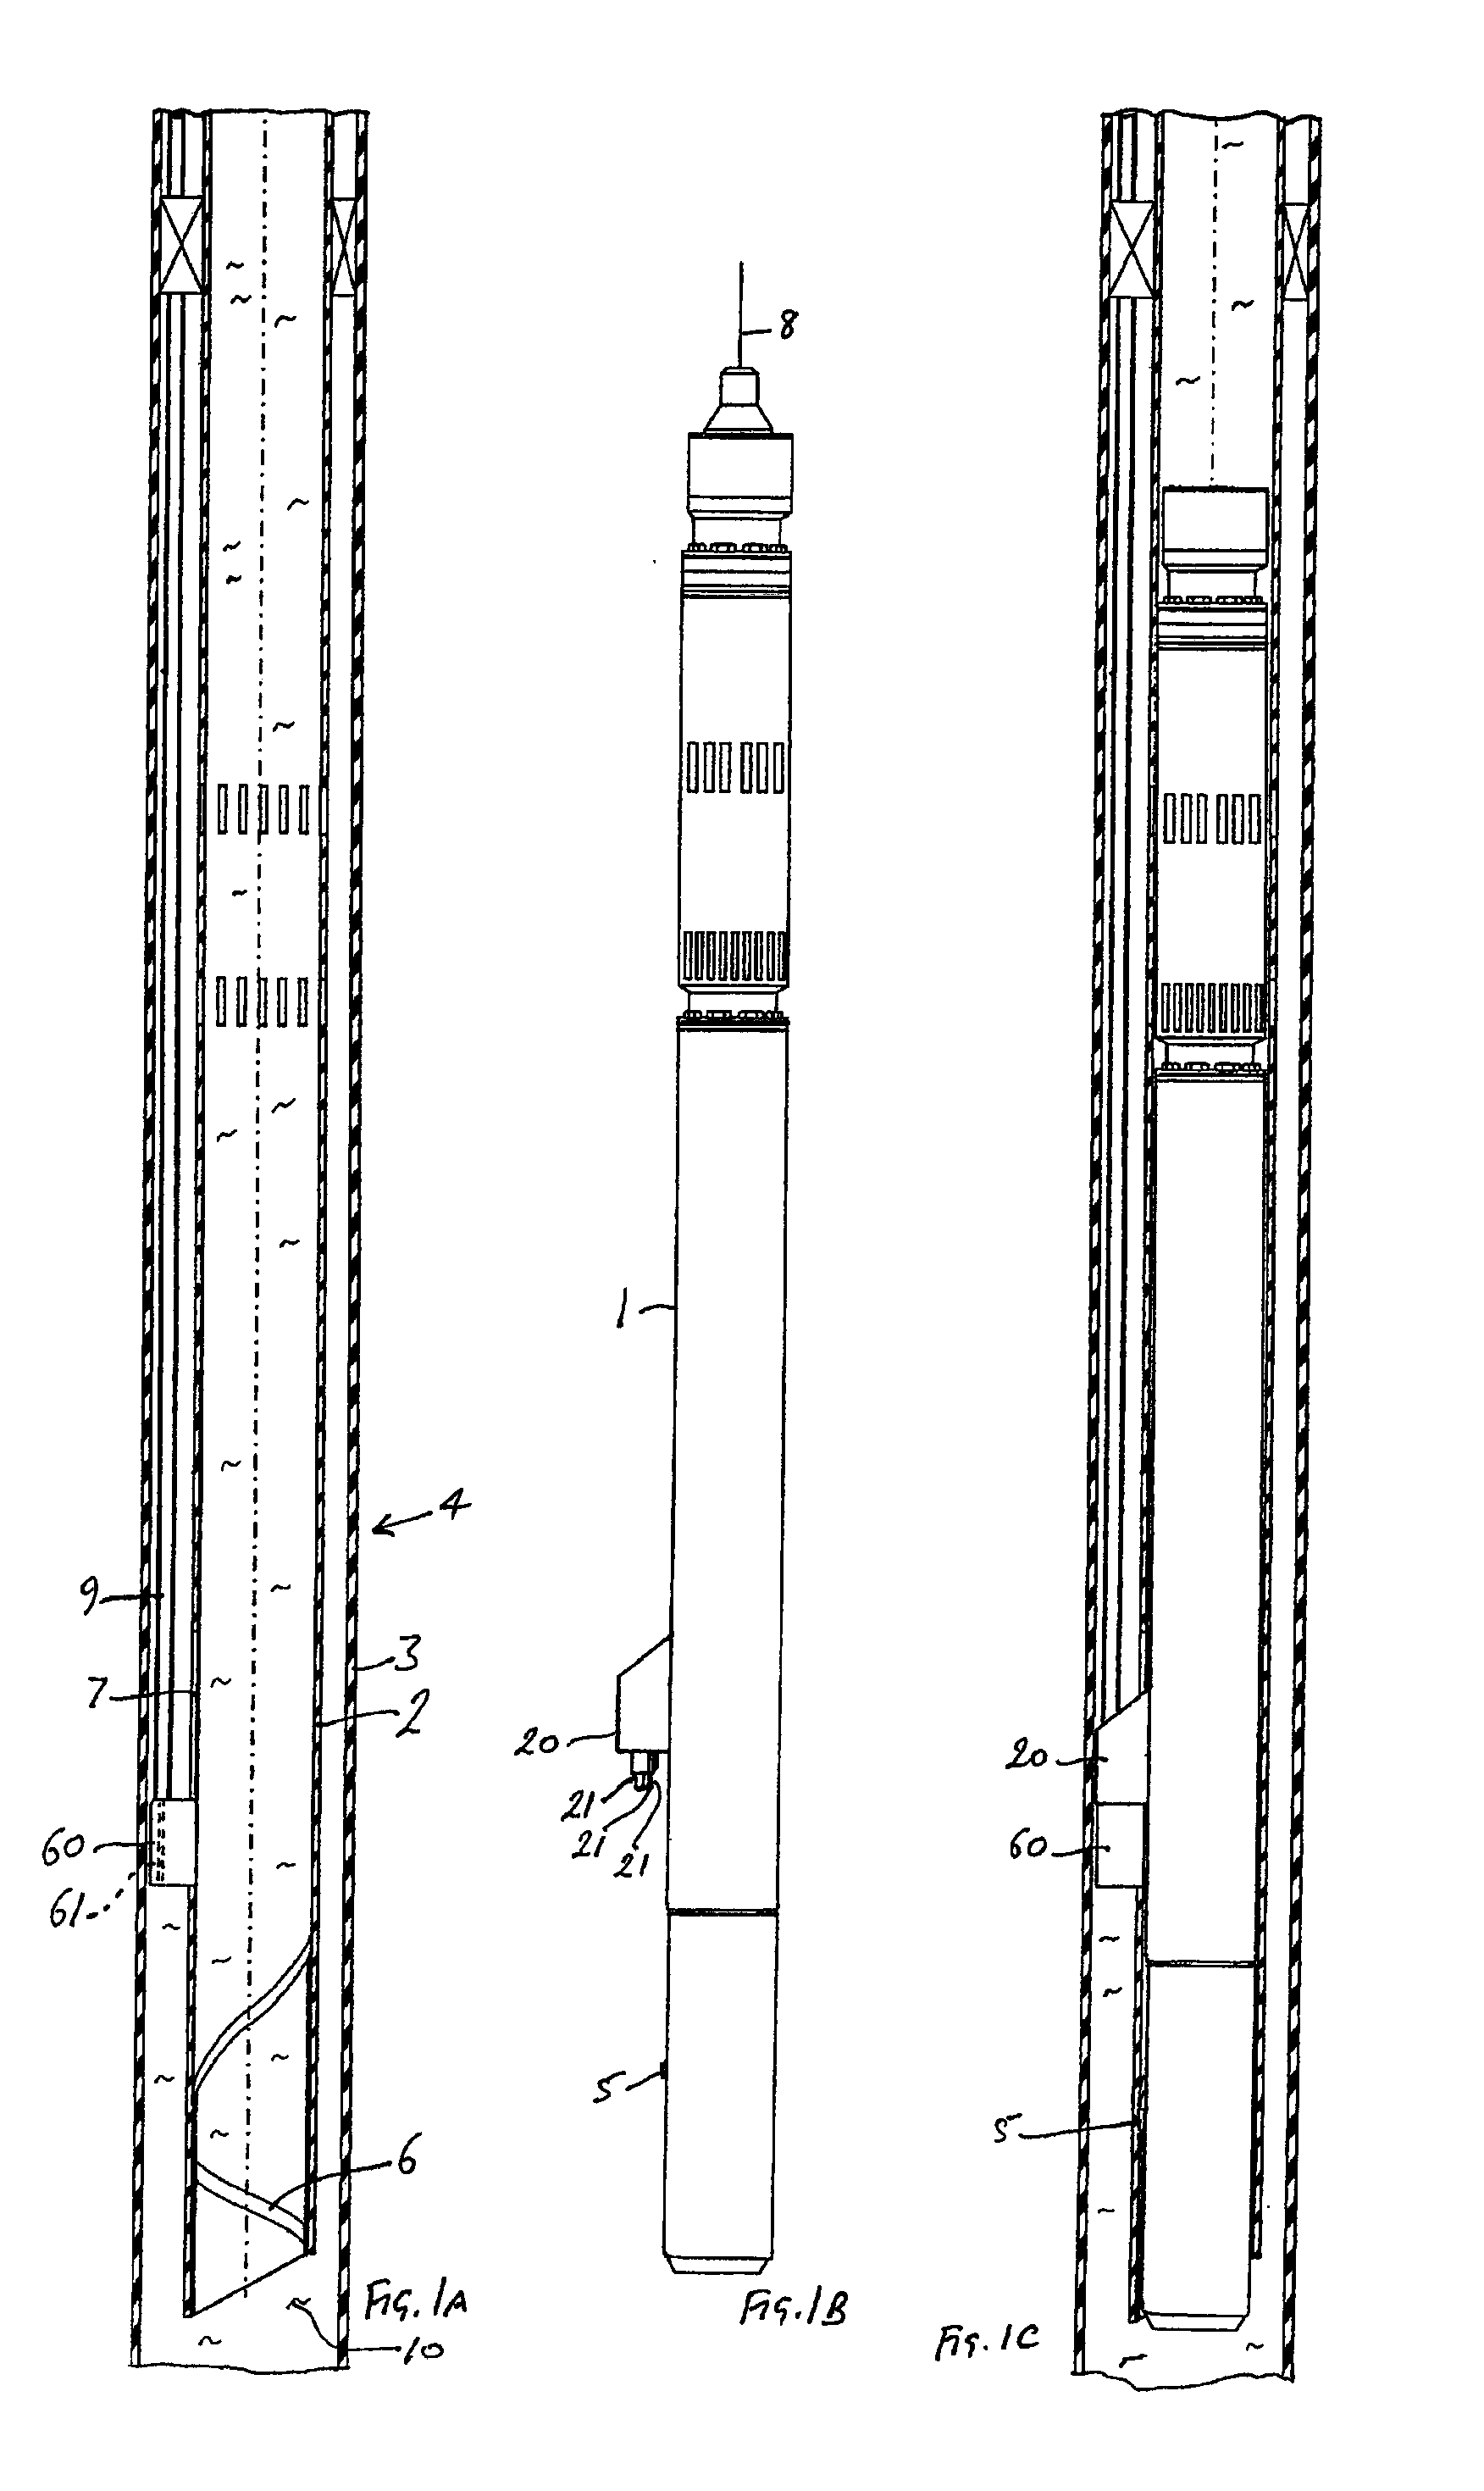 Downhole Electrical Wet Connector